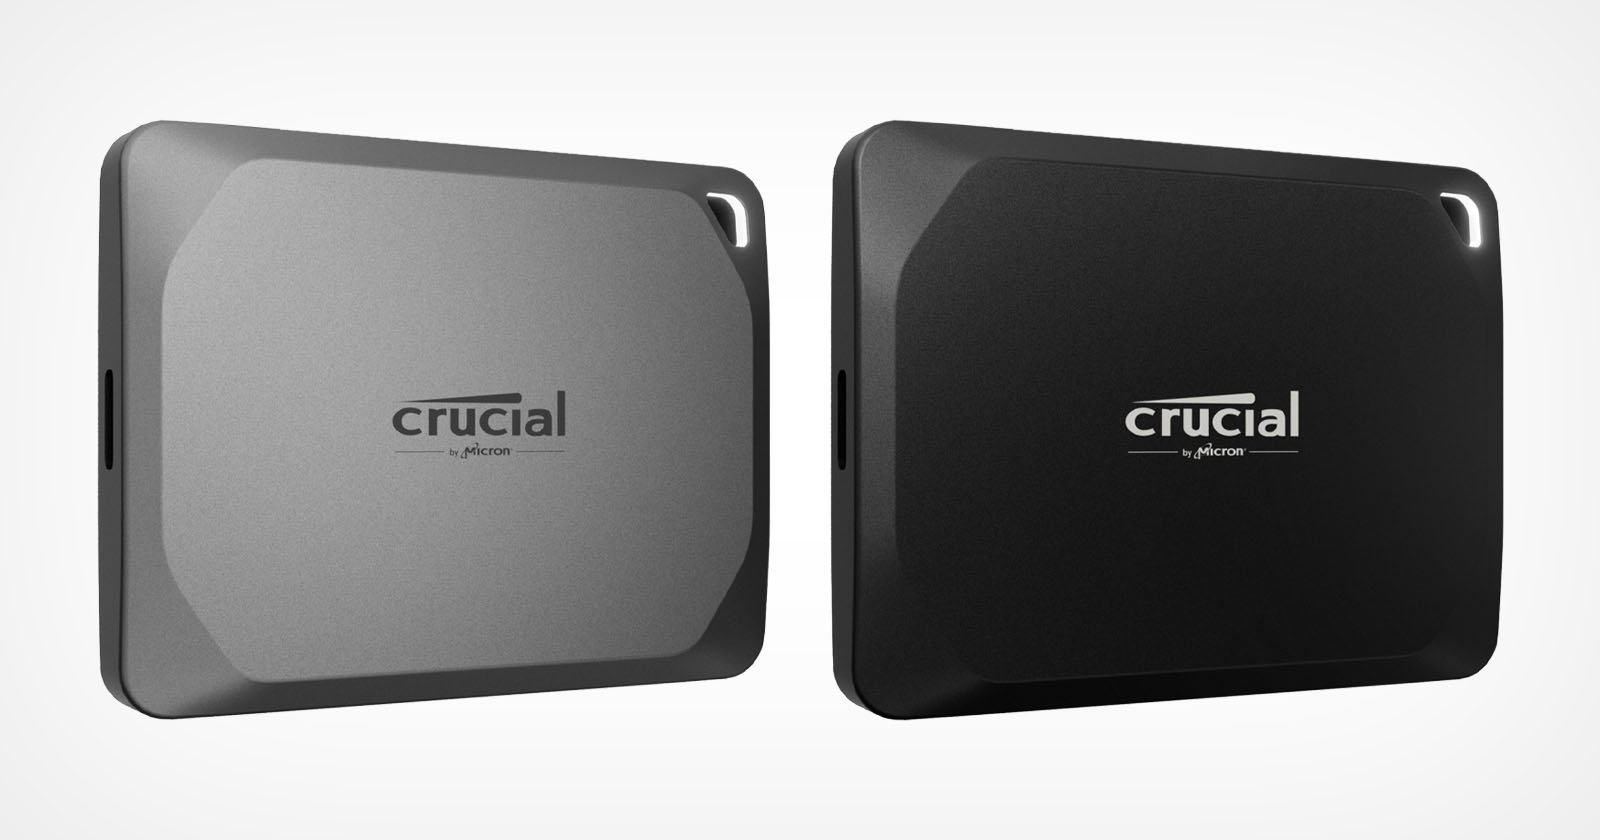 Crucial's new 2,100MB/s X9/X10 Pro portable SSDs now start from